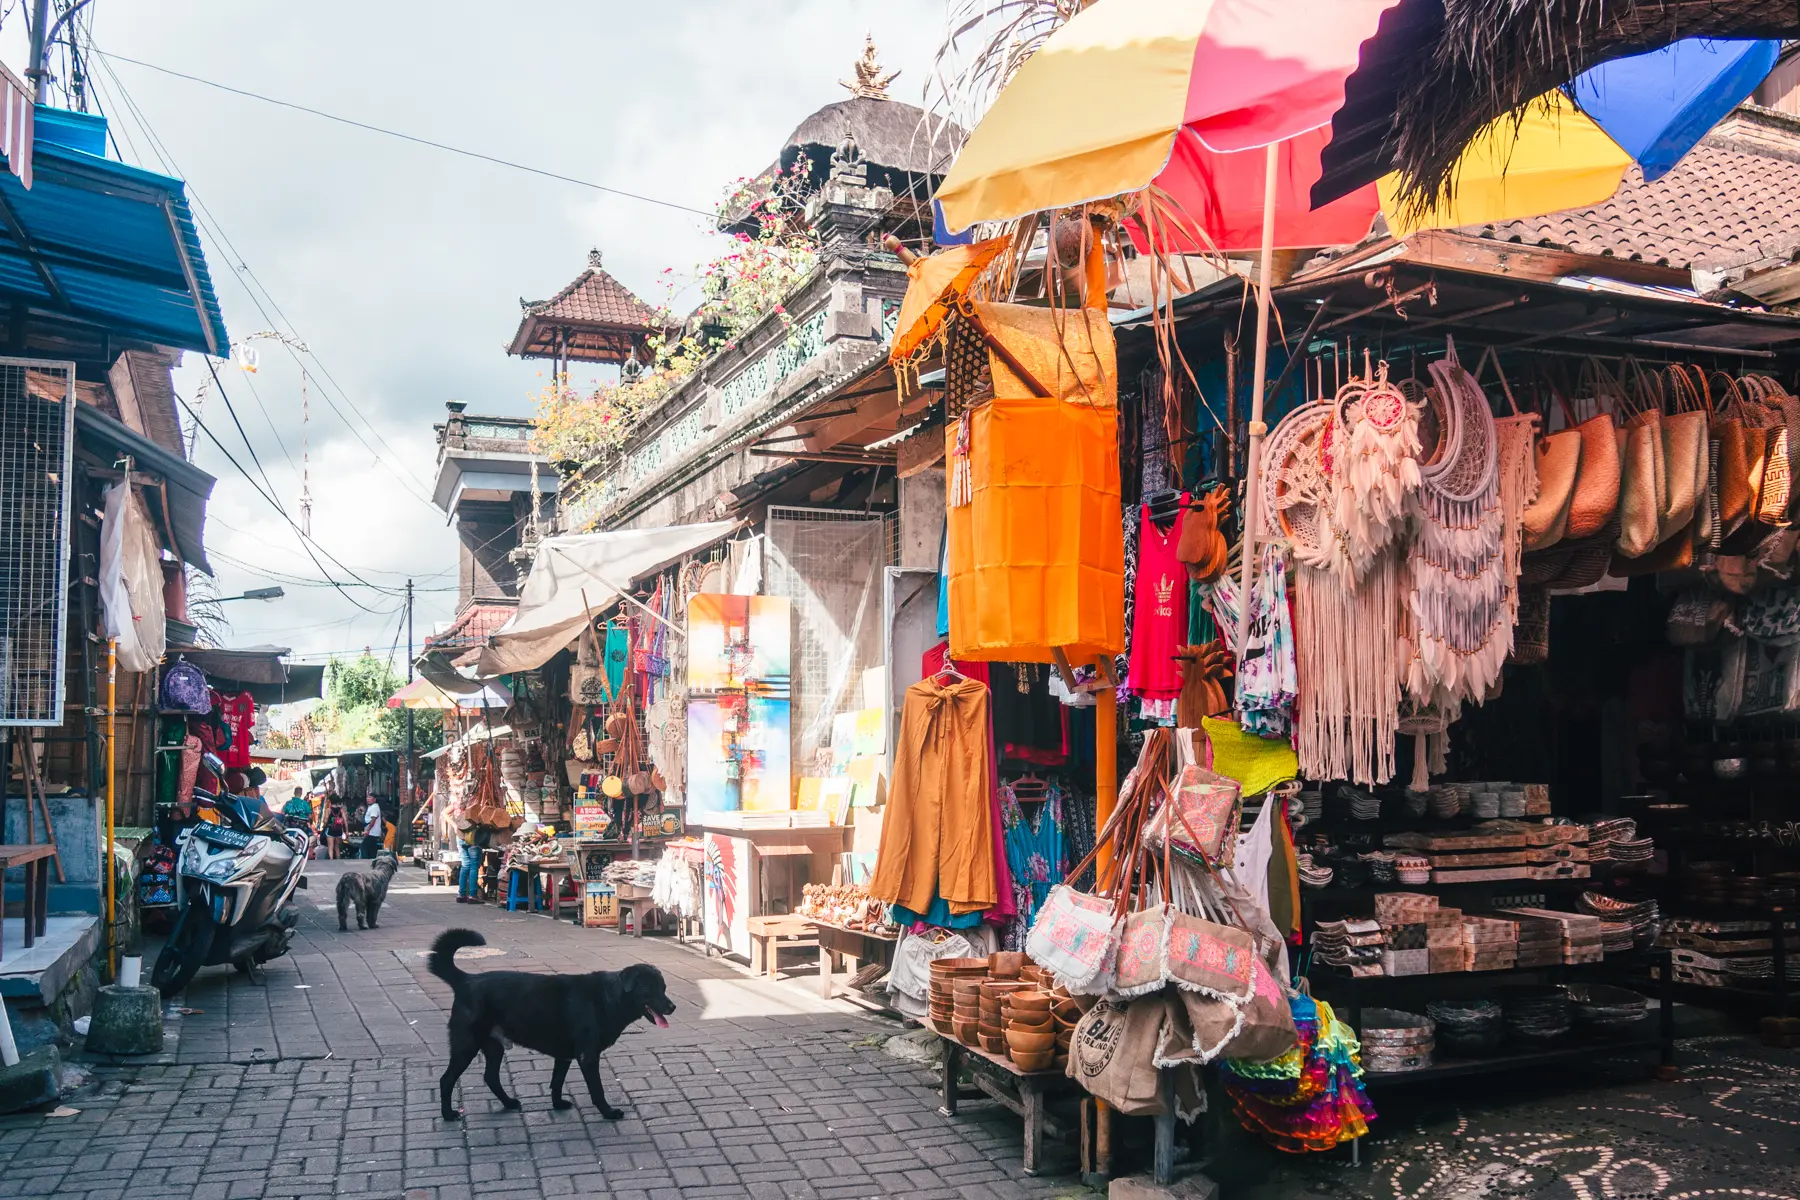 Black dog walking across an alley at Ubud Art Market with stalls selling souvenirs at both sides.